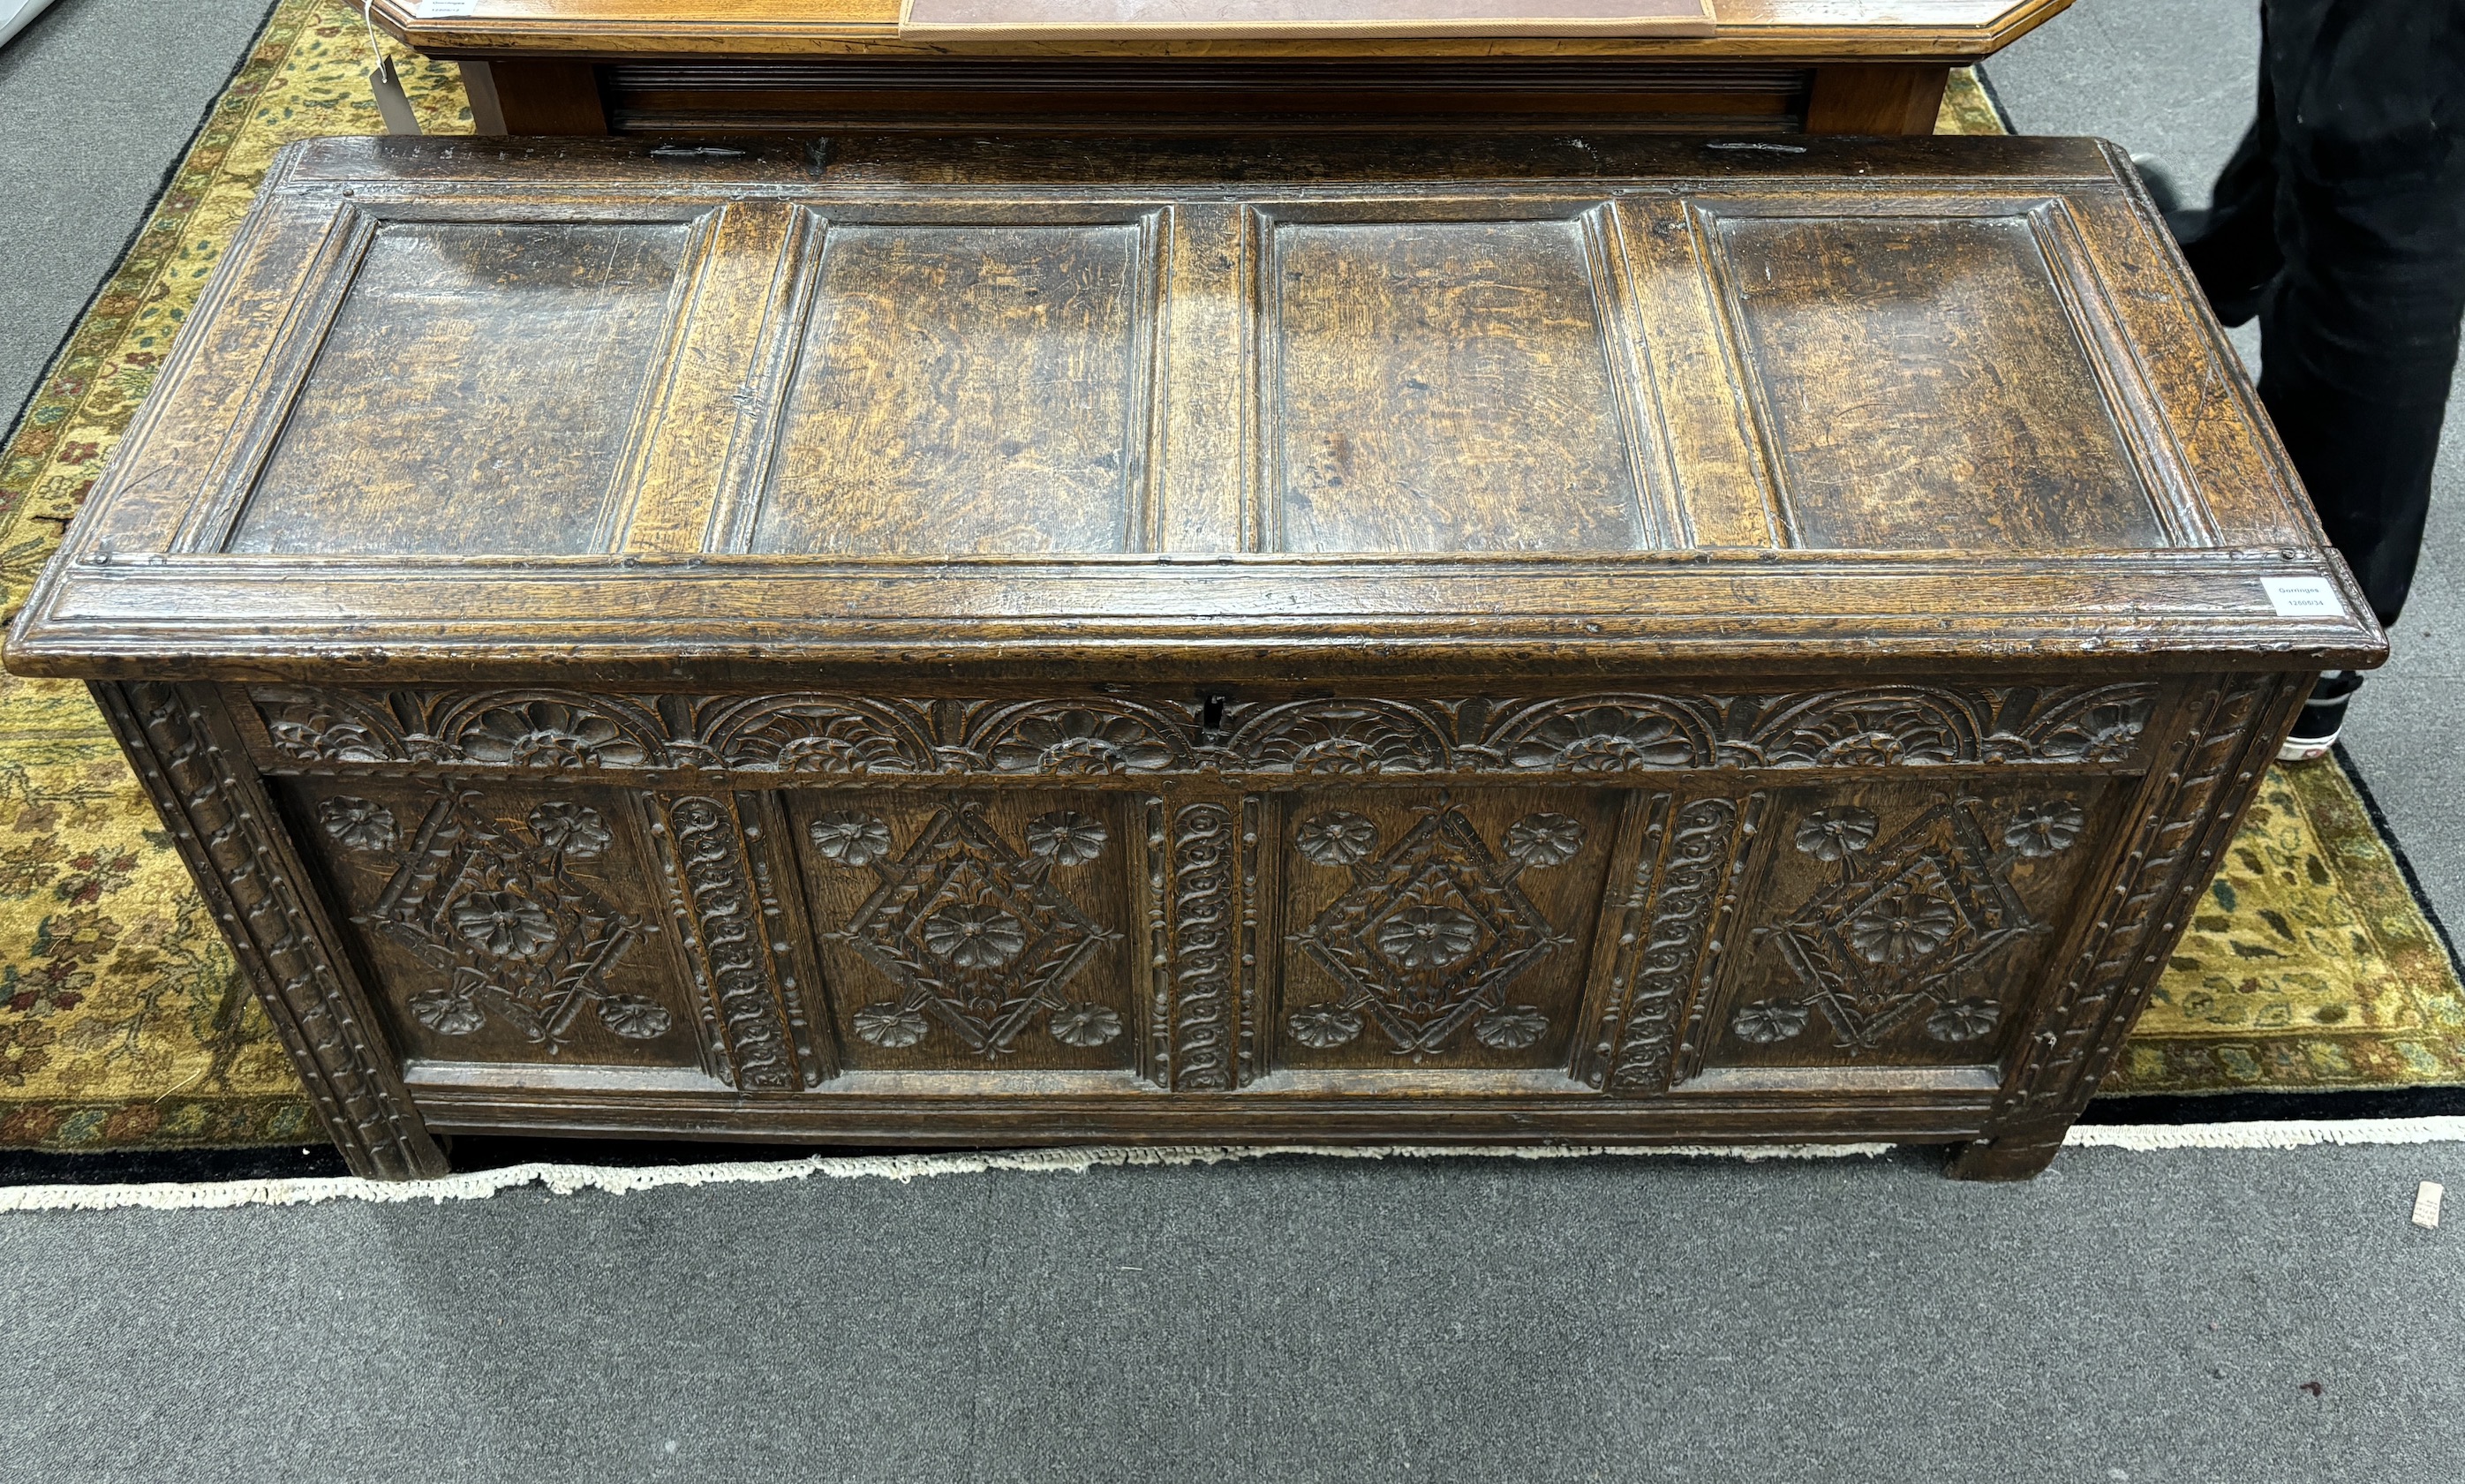 A late 17th century carved oak coffer, the front with four lozenge and rosette panels, beneath a lunette frieze, width 142cm, depth 56cm, height 64cm